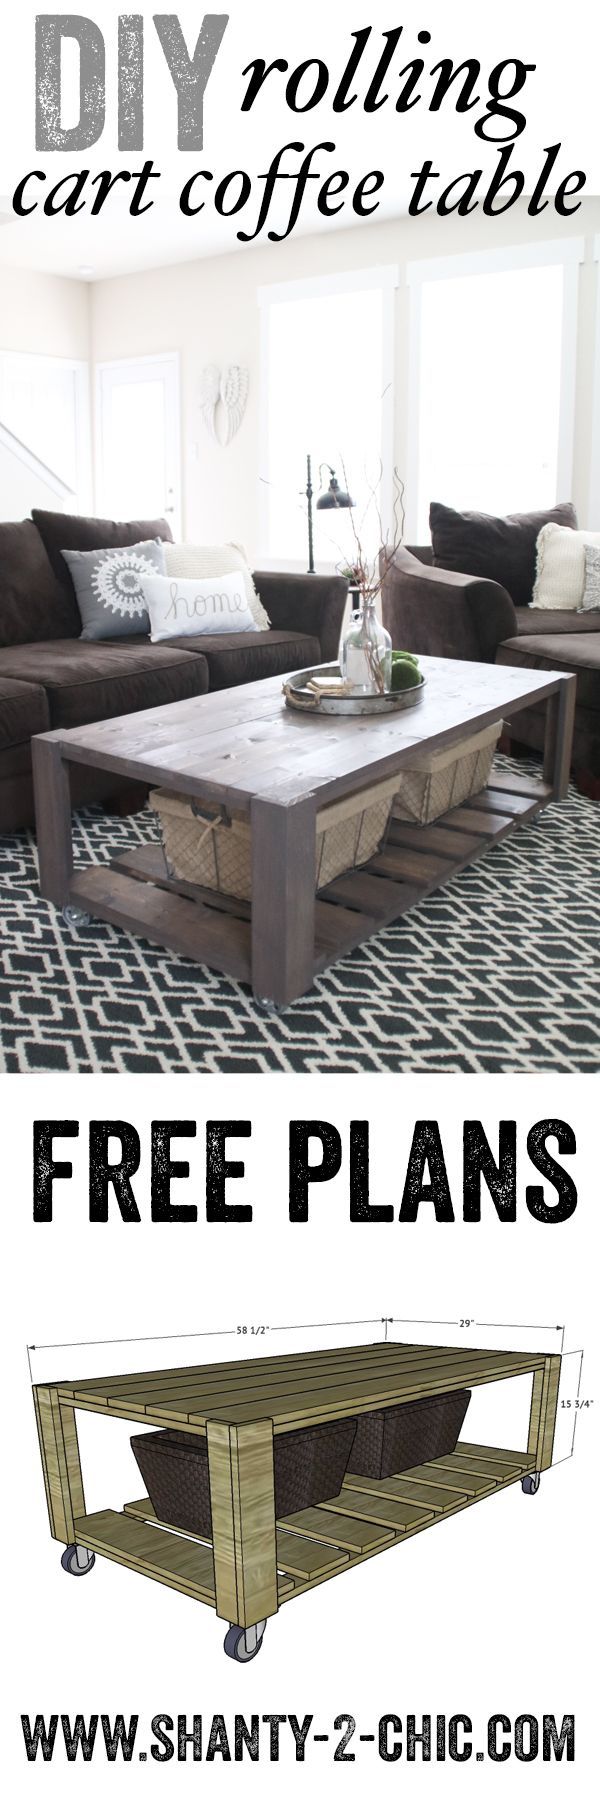 Love this DIY Crate Coffee Table on Wheels! Perfect project to recycle old pallet wood too! Free plans at www.shanty-2-chic.com